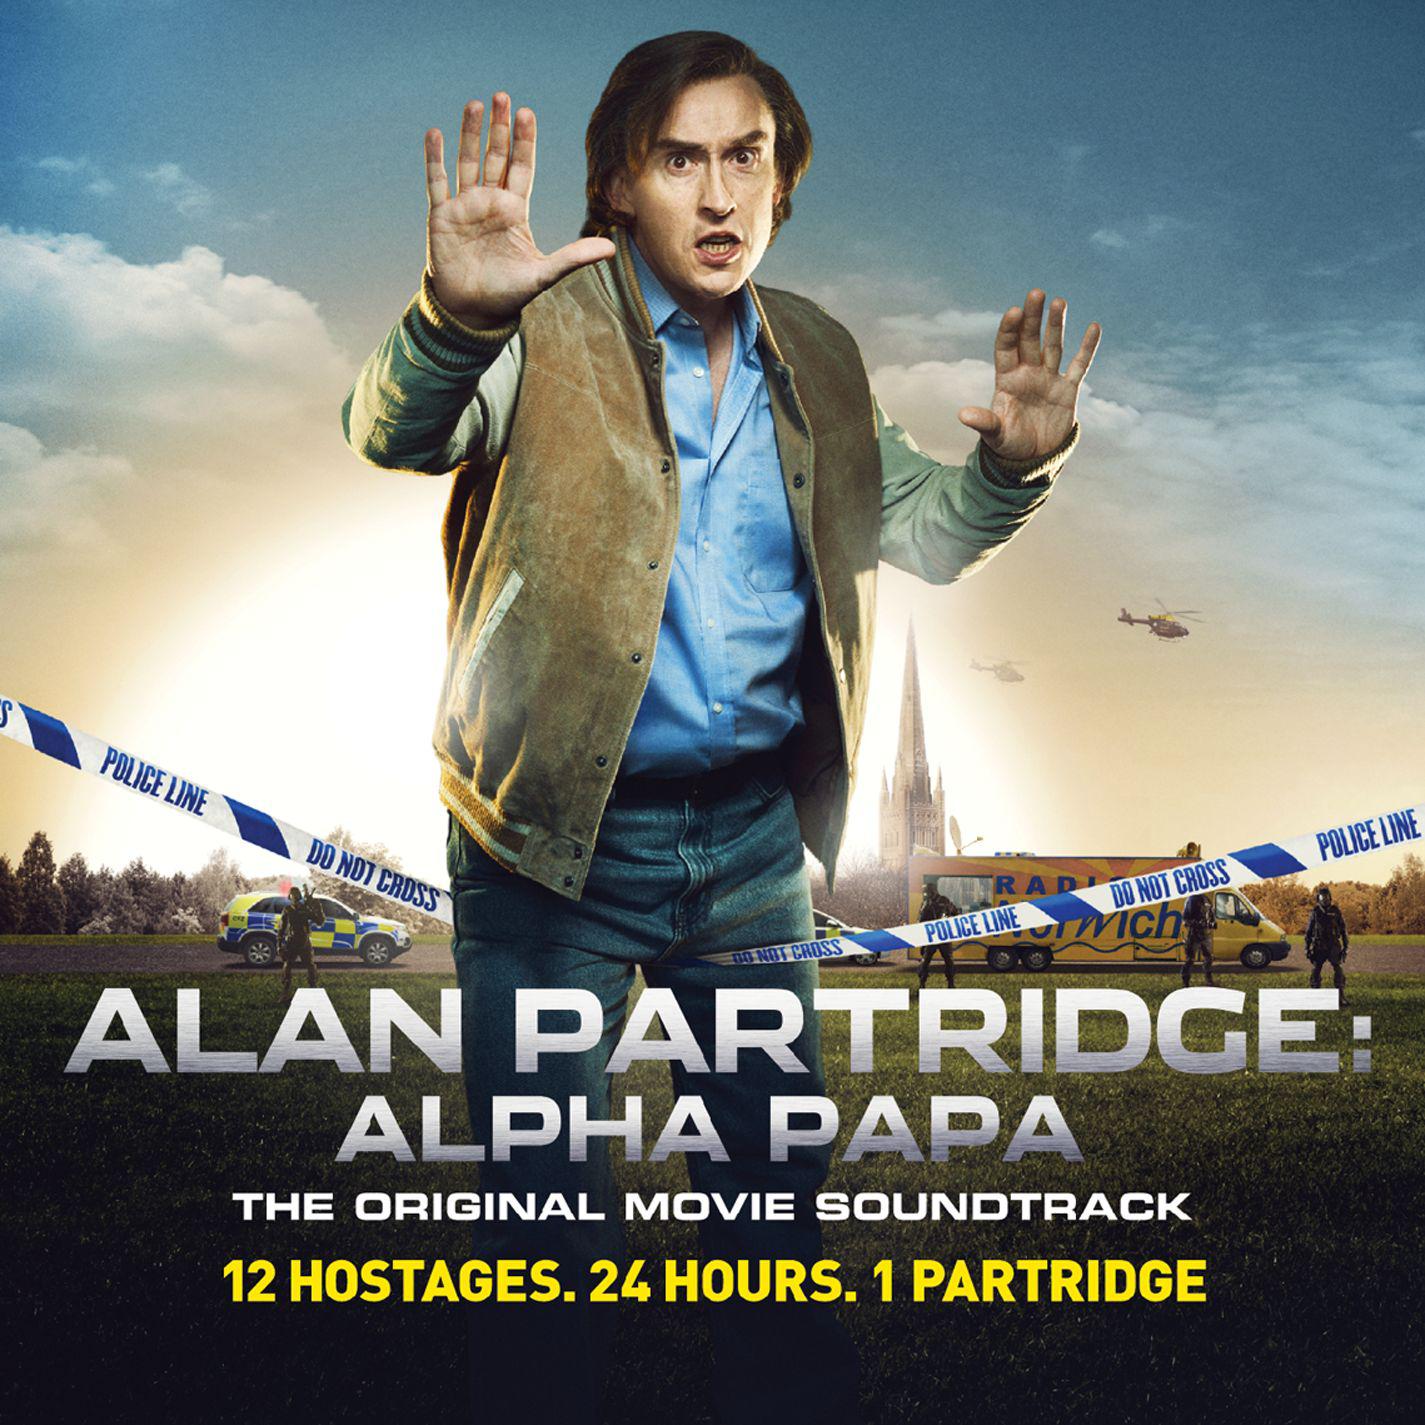 Alan Partridge - Coming Up Next (Quote)